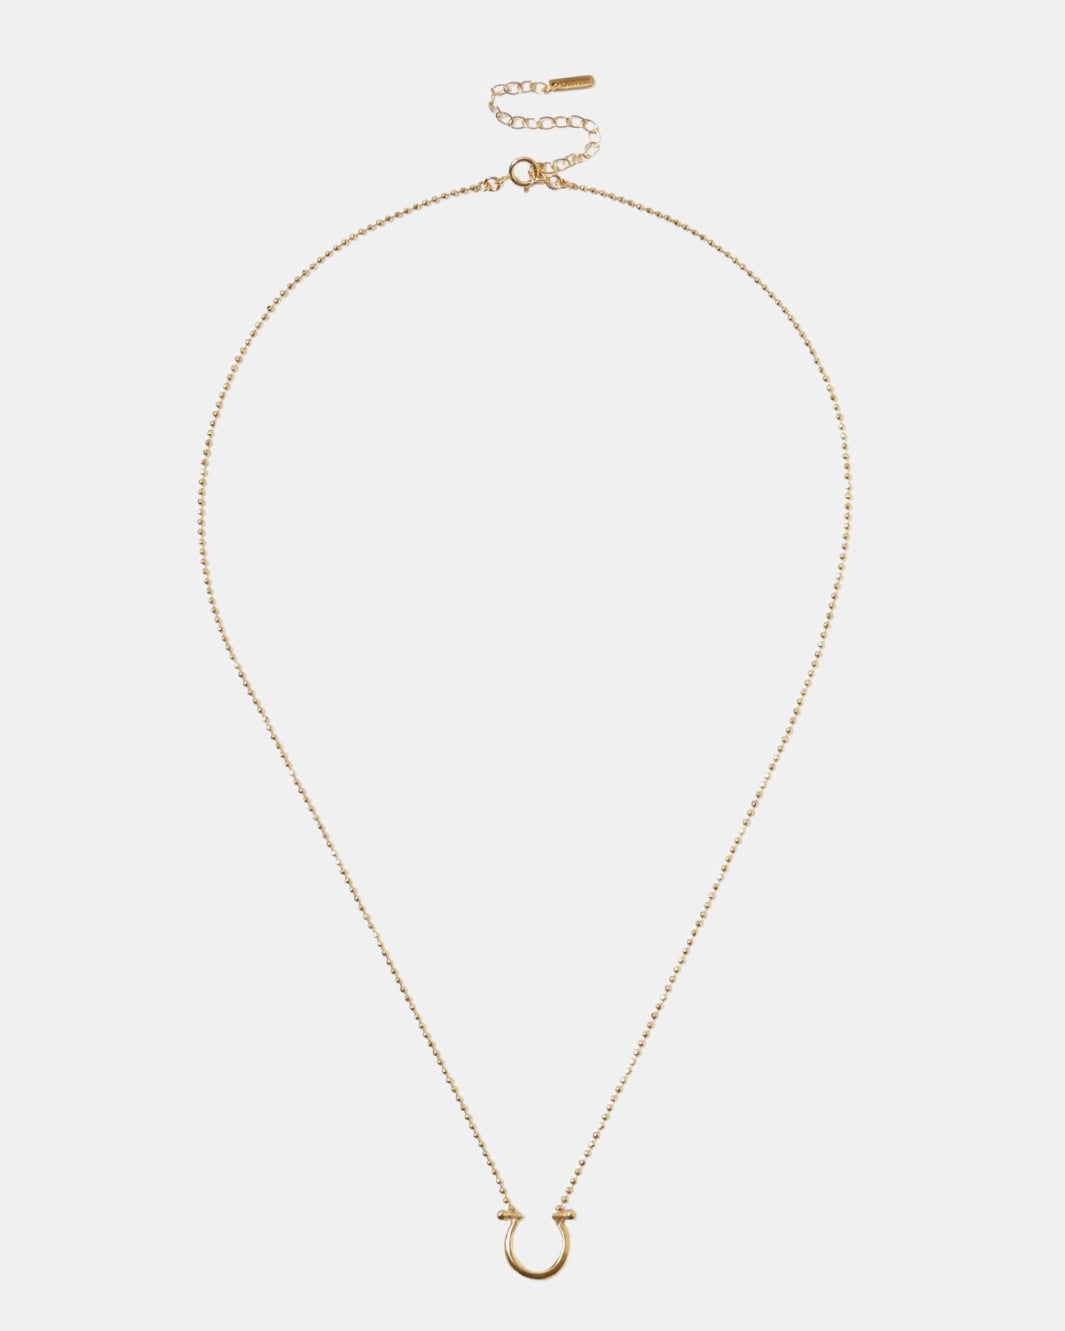 HORSESHOE NECKLACE IN YELLOW GOLD - Romi Boutique